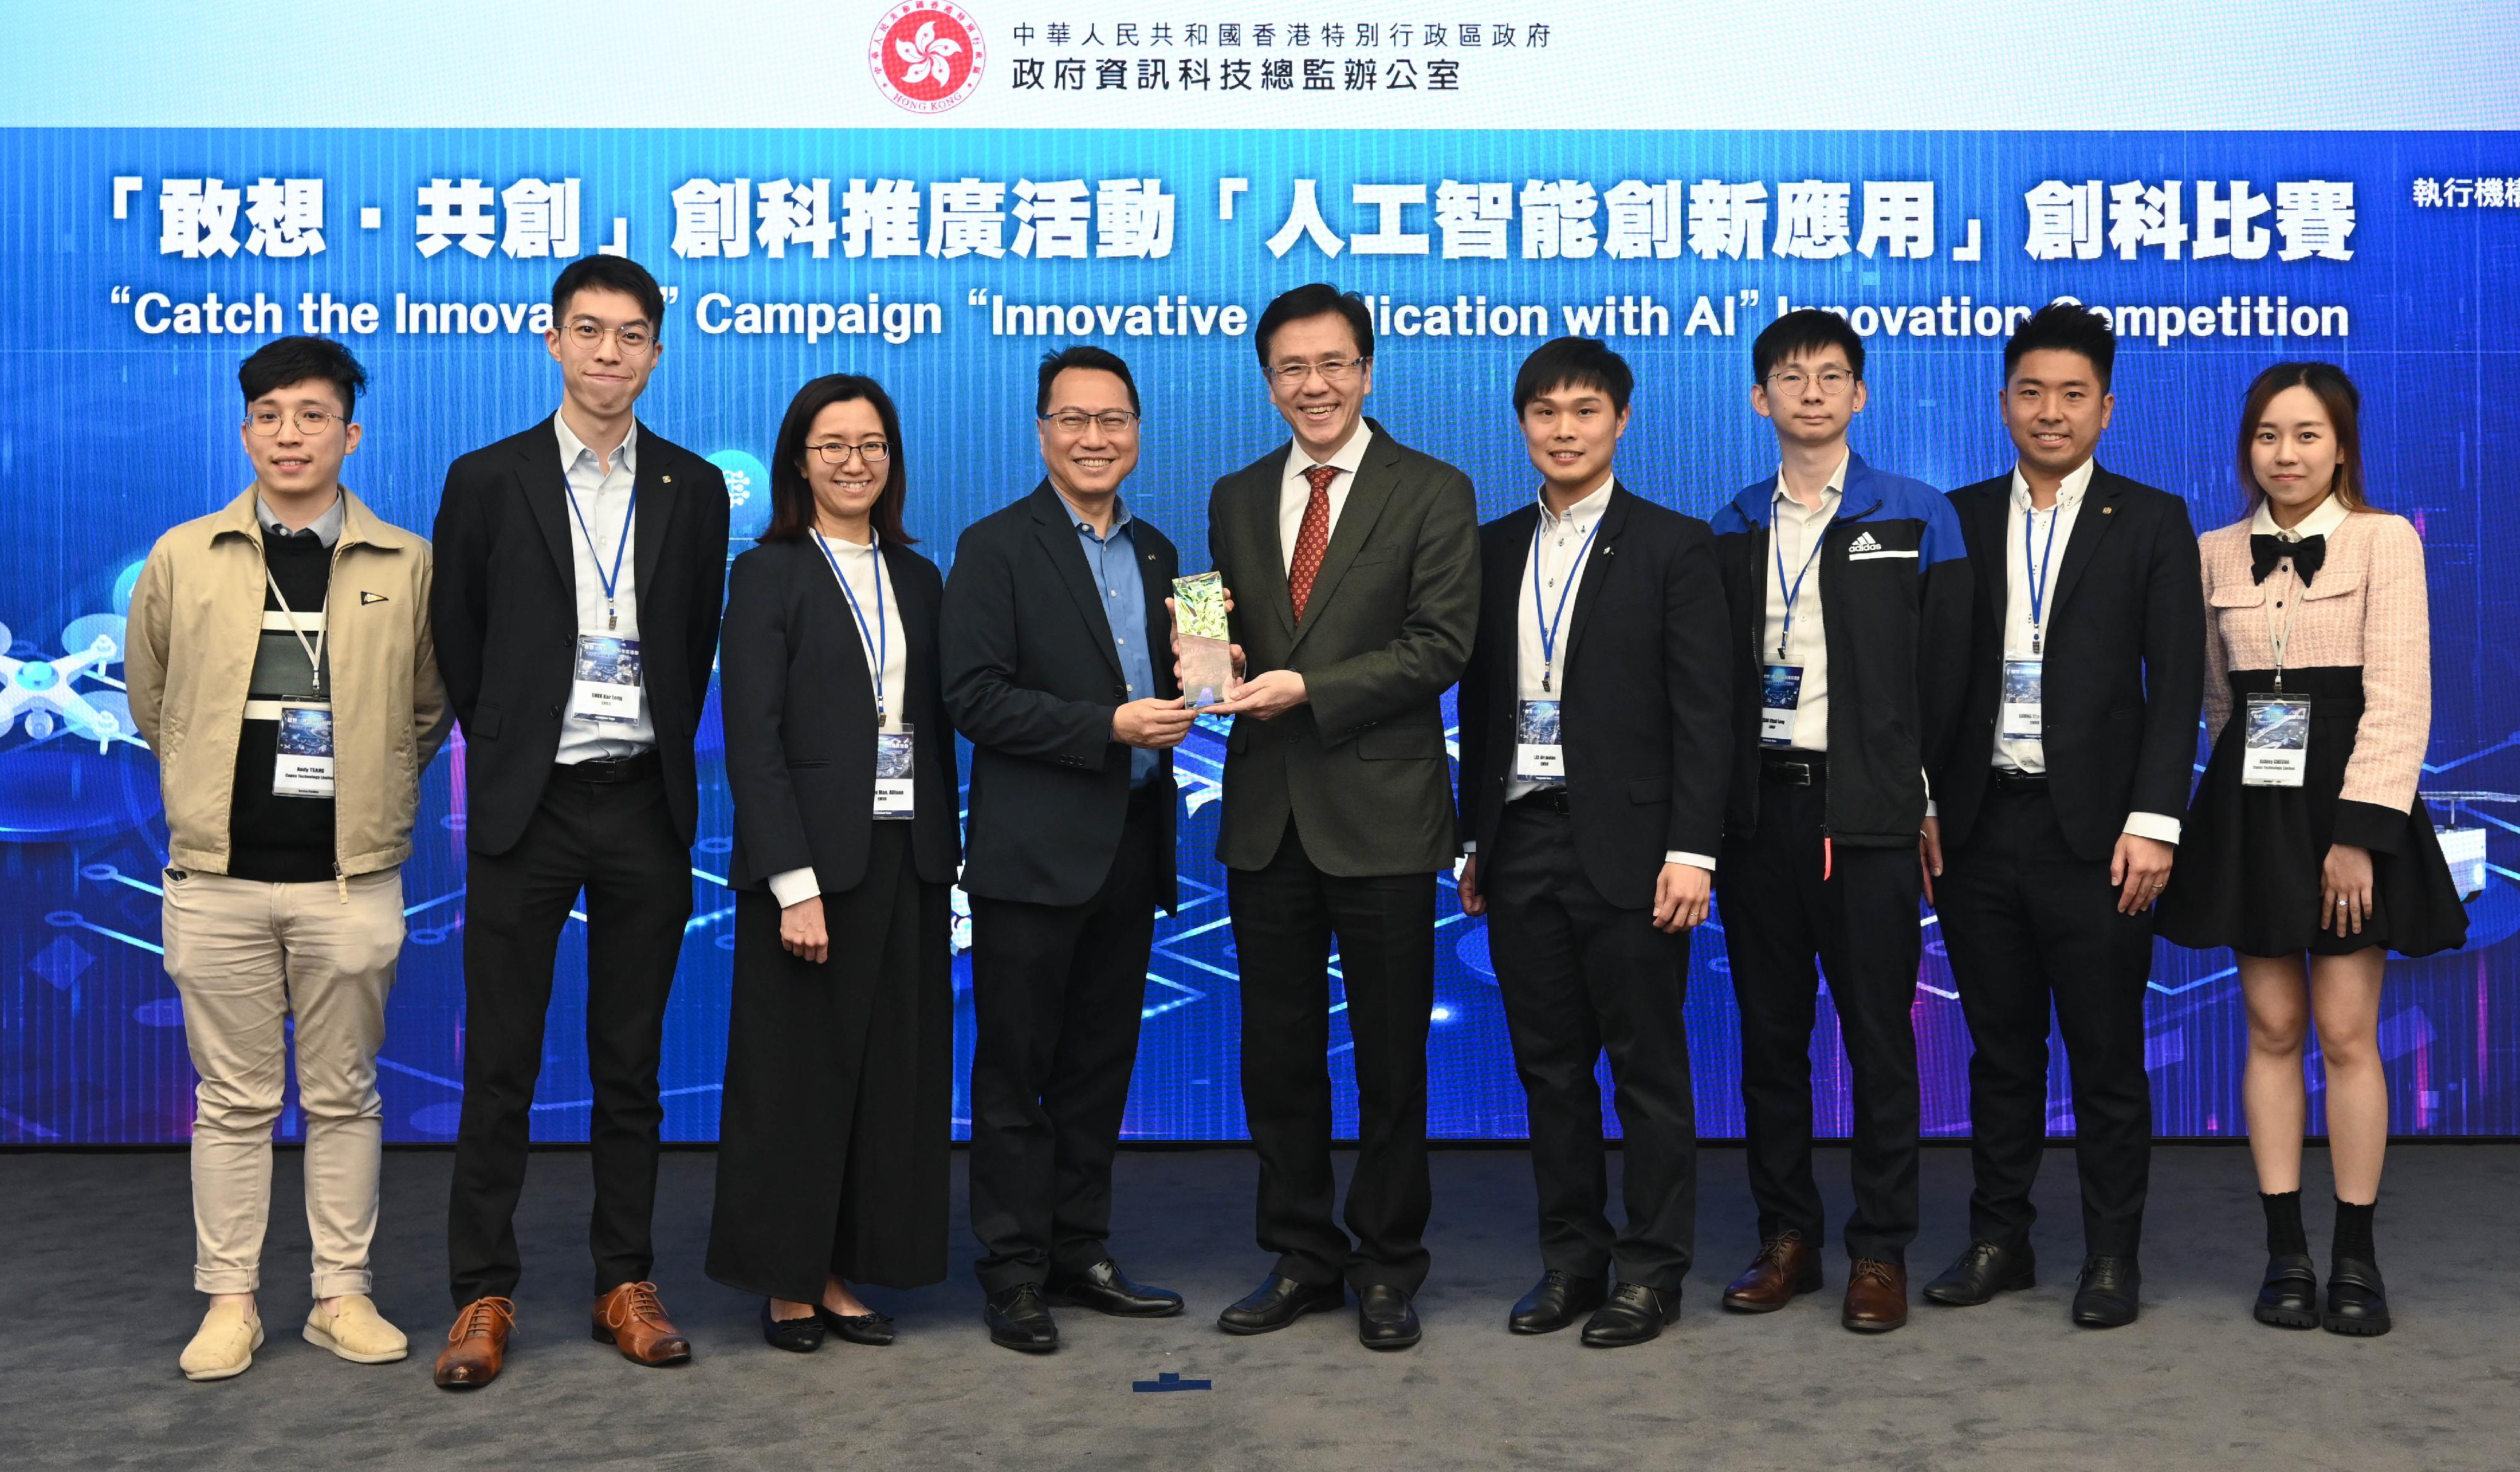 The Secretary for Innovation, Technology and Industry, Professor Sun Dong (centre), presents the second runner-up award to team members of the project "Mass Deployment of Semantic Modelling using BIM, BIM-AM and iBMS" at the Award Presentation Ceremony for the "Innovative Application with AI" Innovation Competition today (March 15) and is pictured with representatives of the relevant department and the service provider. The department to which the team members belong is the Electrical and Mechanical Services Department.